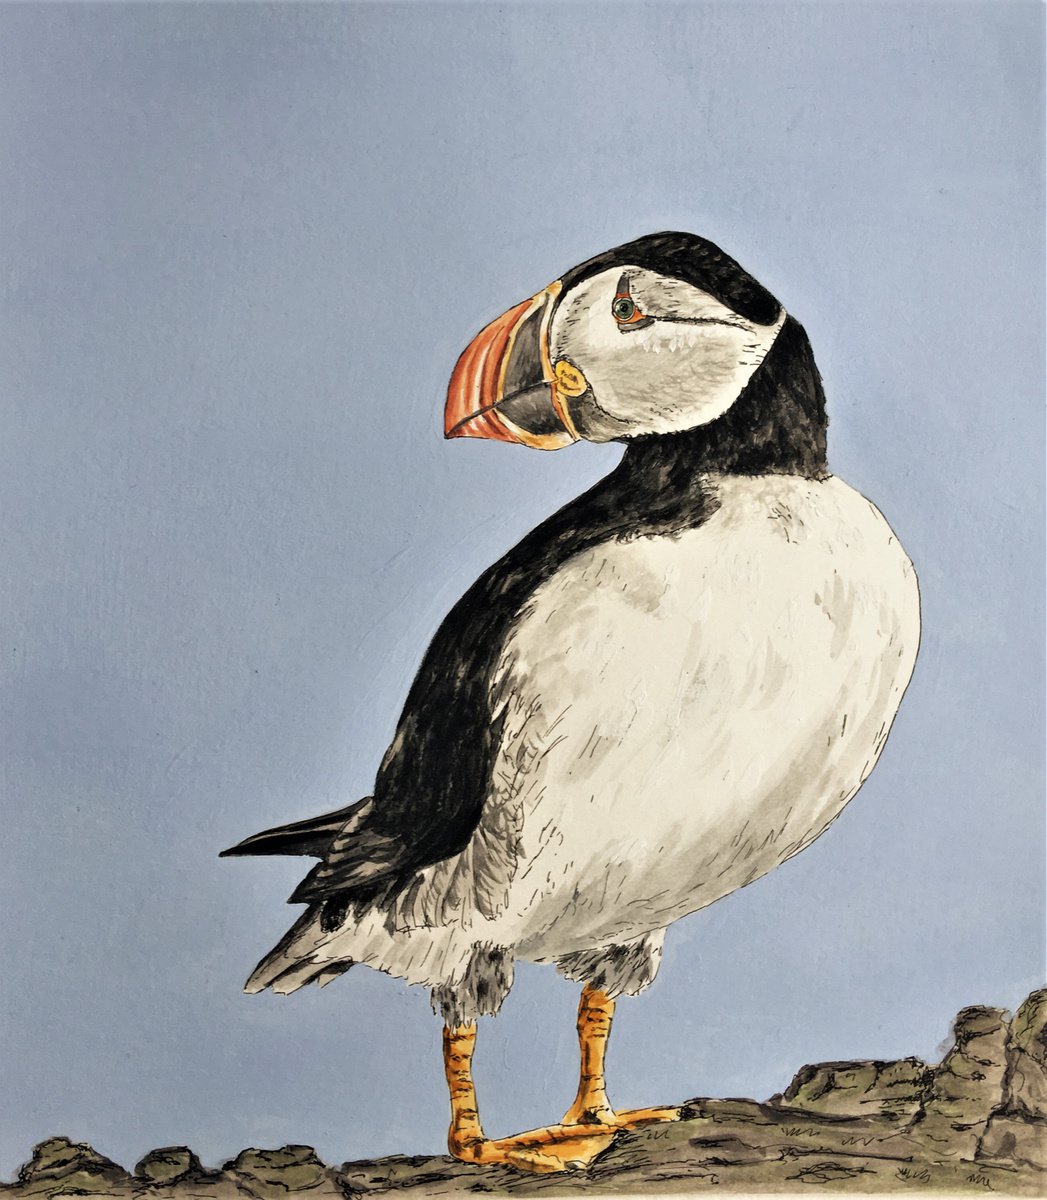 Puffin #2 by Laurence Wheeler